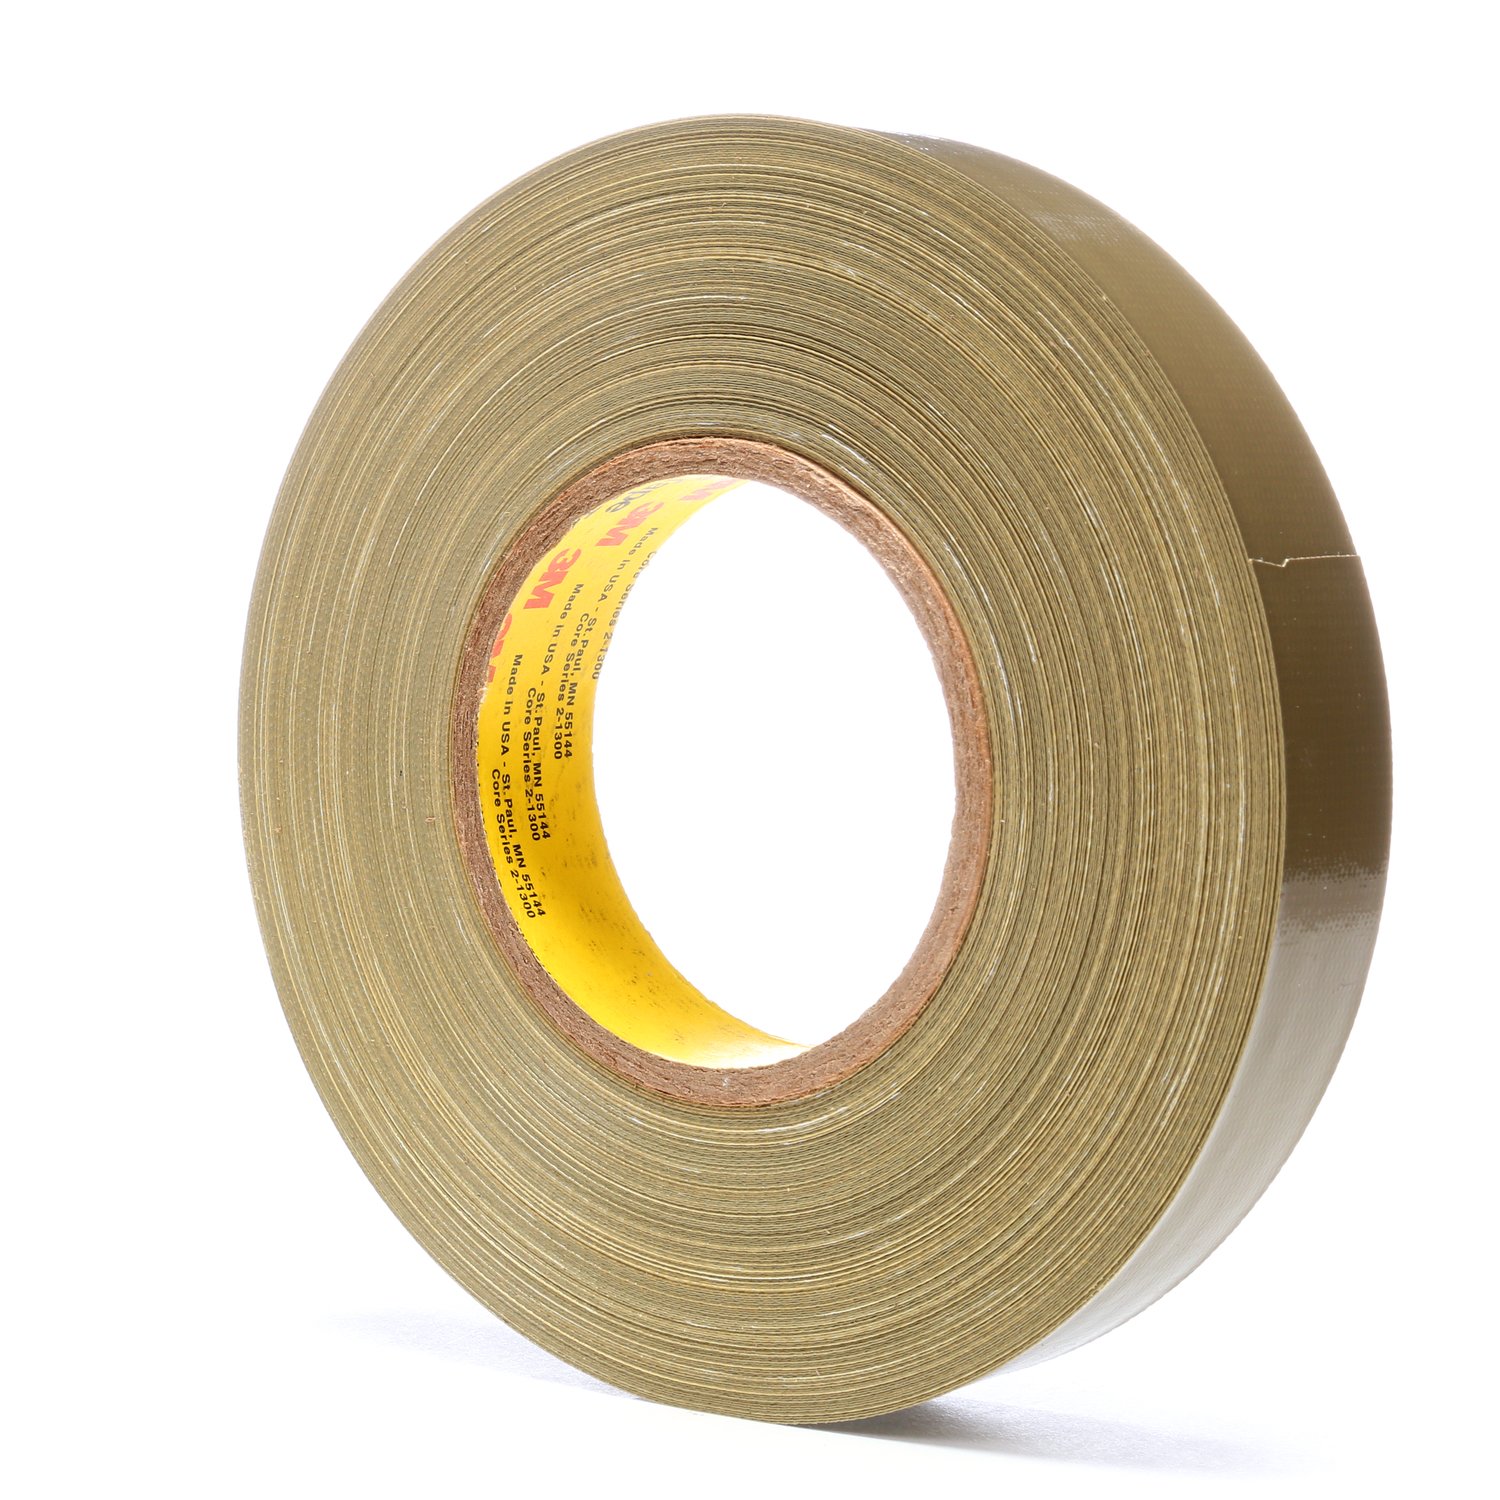 7000123294 - Scotch Polyethylene Coated Cloth Tape 390, Olive, 1 in x 60 yd, 11.7
mil, 36/Case